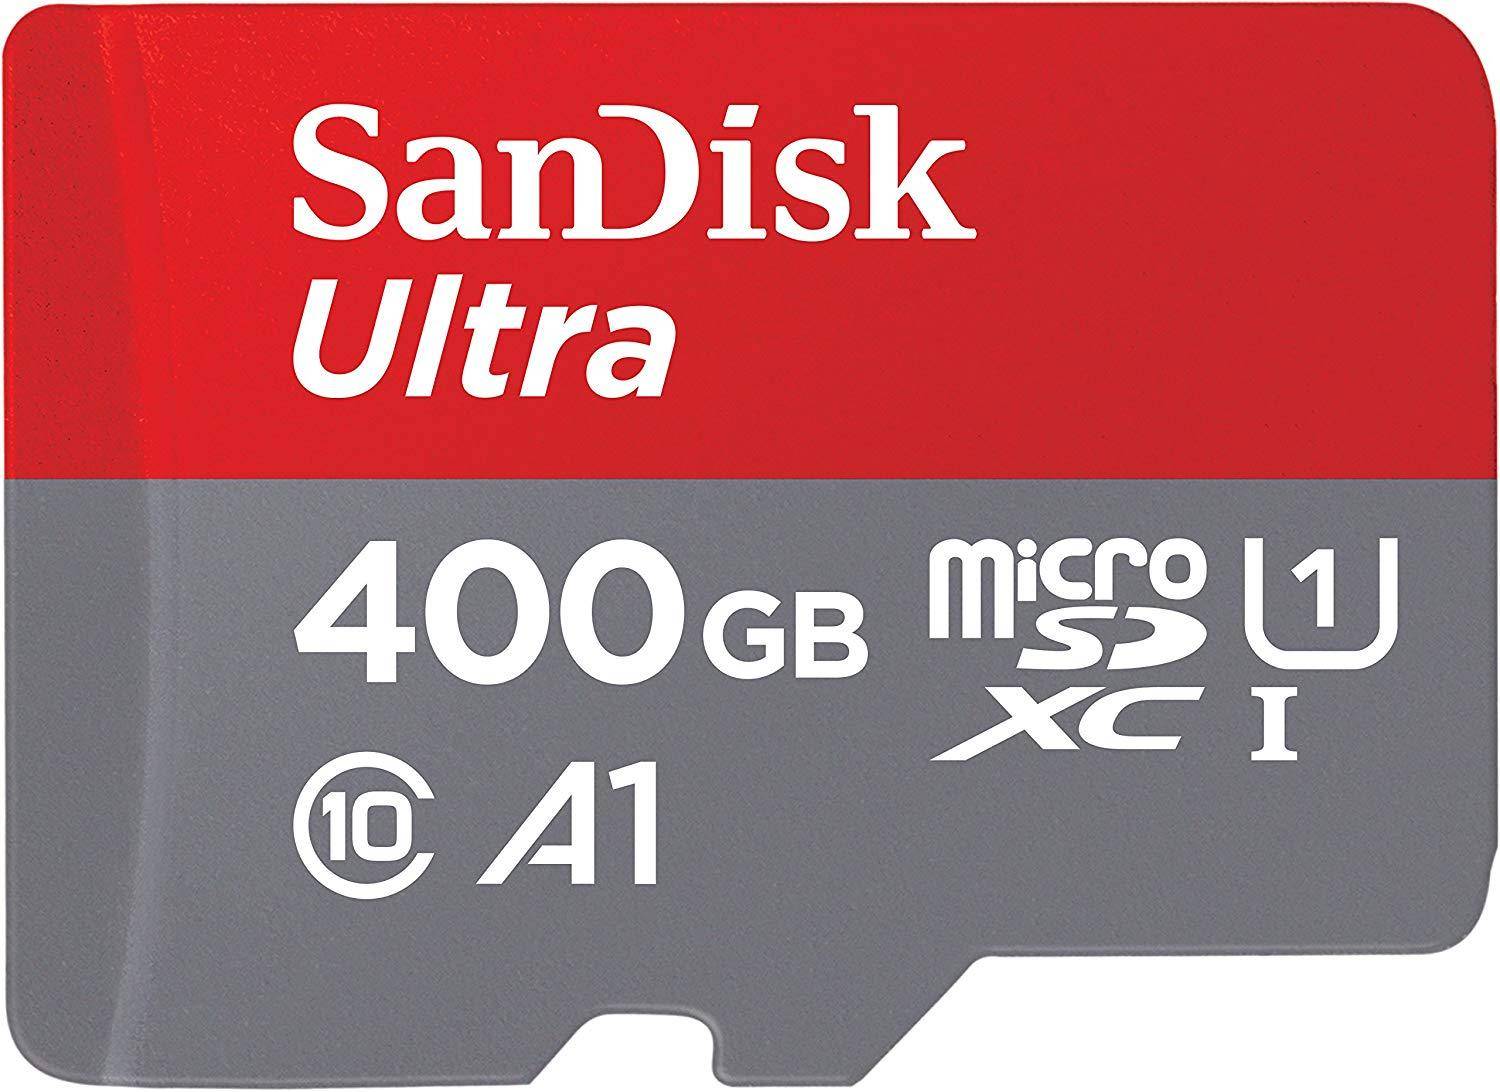 SanDisk Ultra A1 Class 10 MicroSDXC UHS-I 400GB Memory Card with Adapter (SDSQUAR-400G-GN6MA) zoom image